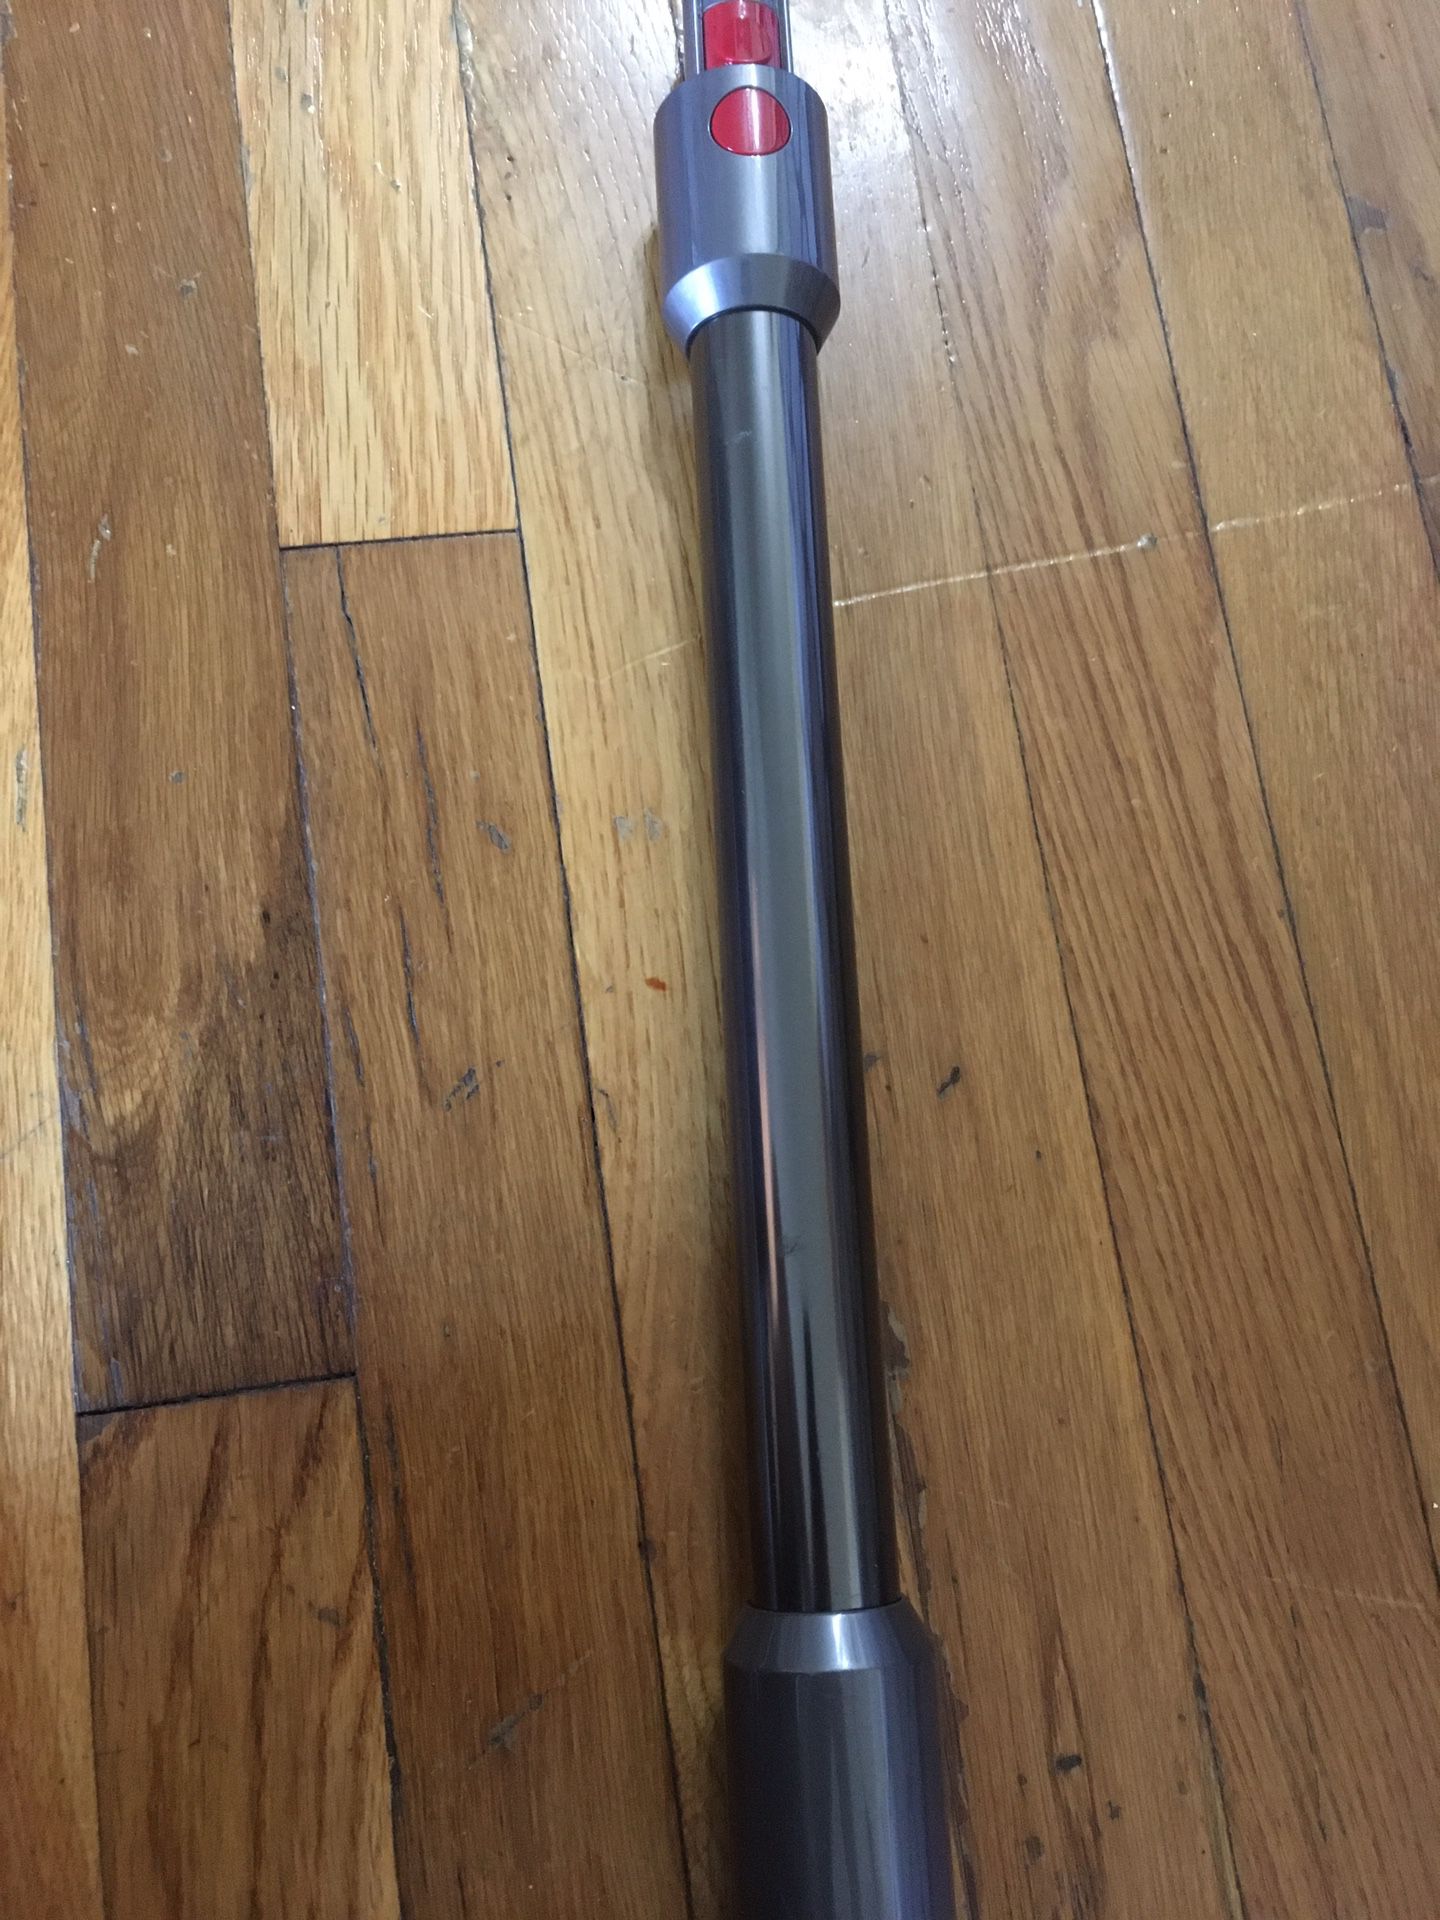 Dyson Genuine Stick / wand / tube Dyson Omni-Glide Floor Head- SV19.  Item is previously used but is cleaned up in and out and in good working conditi